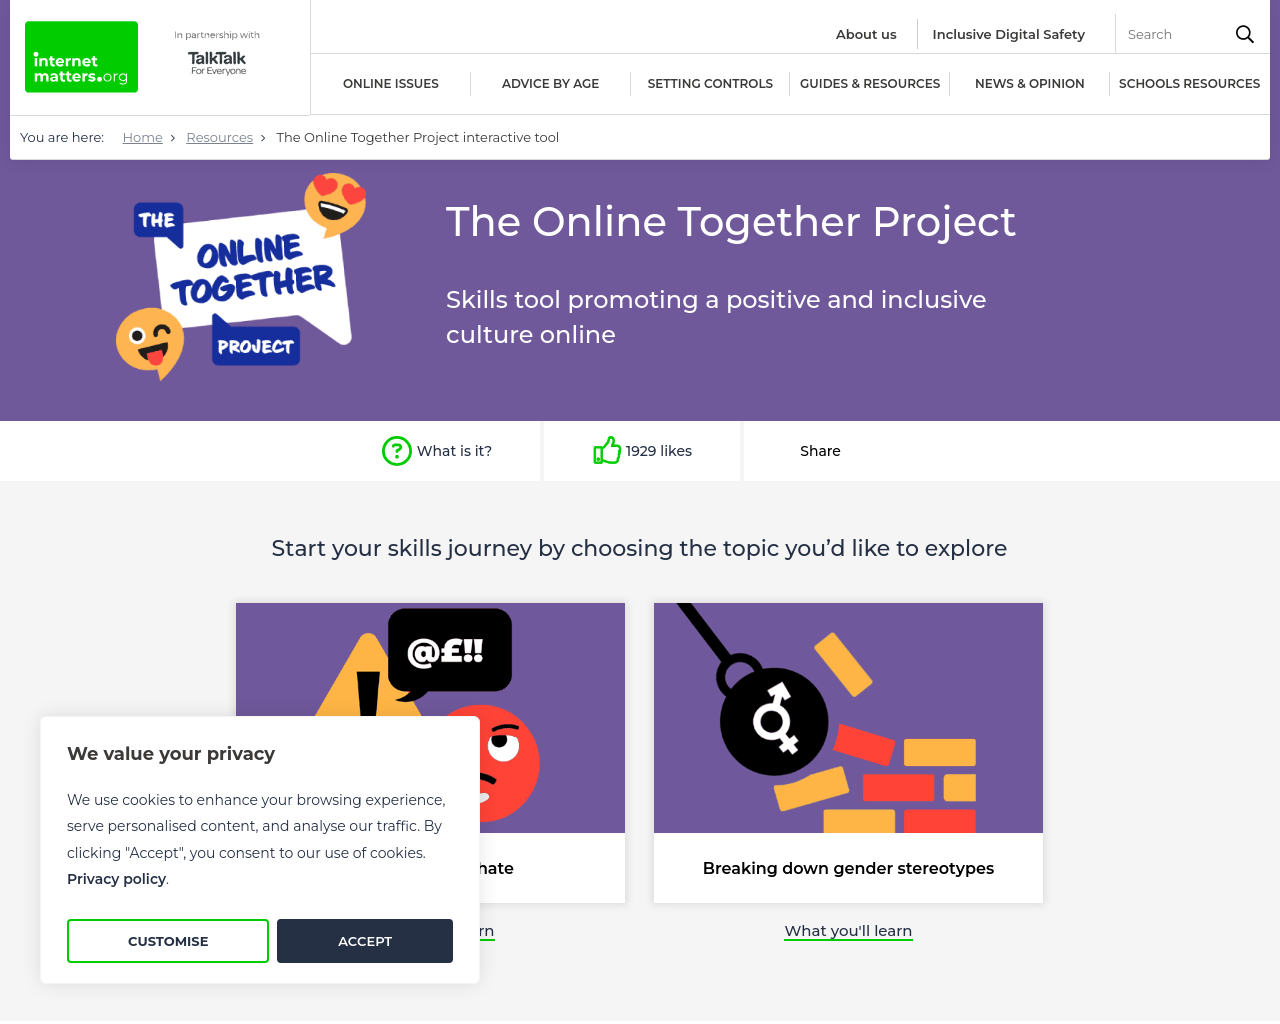 Online Together Project